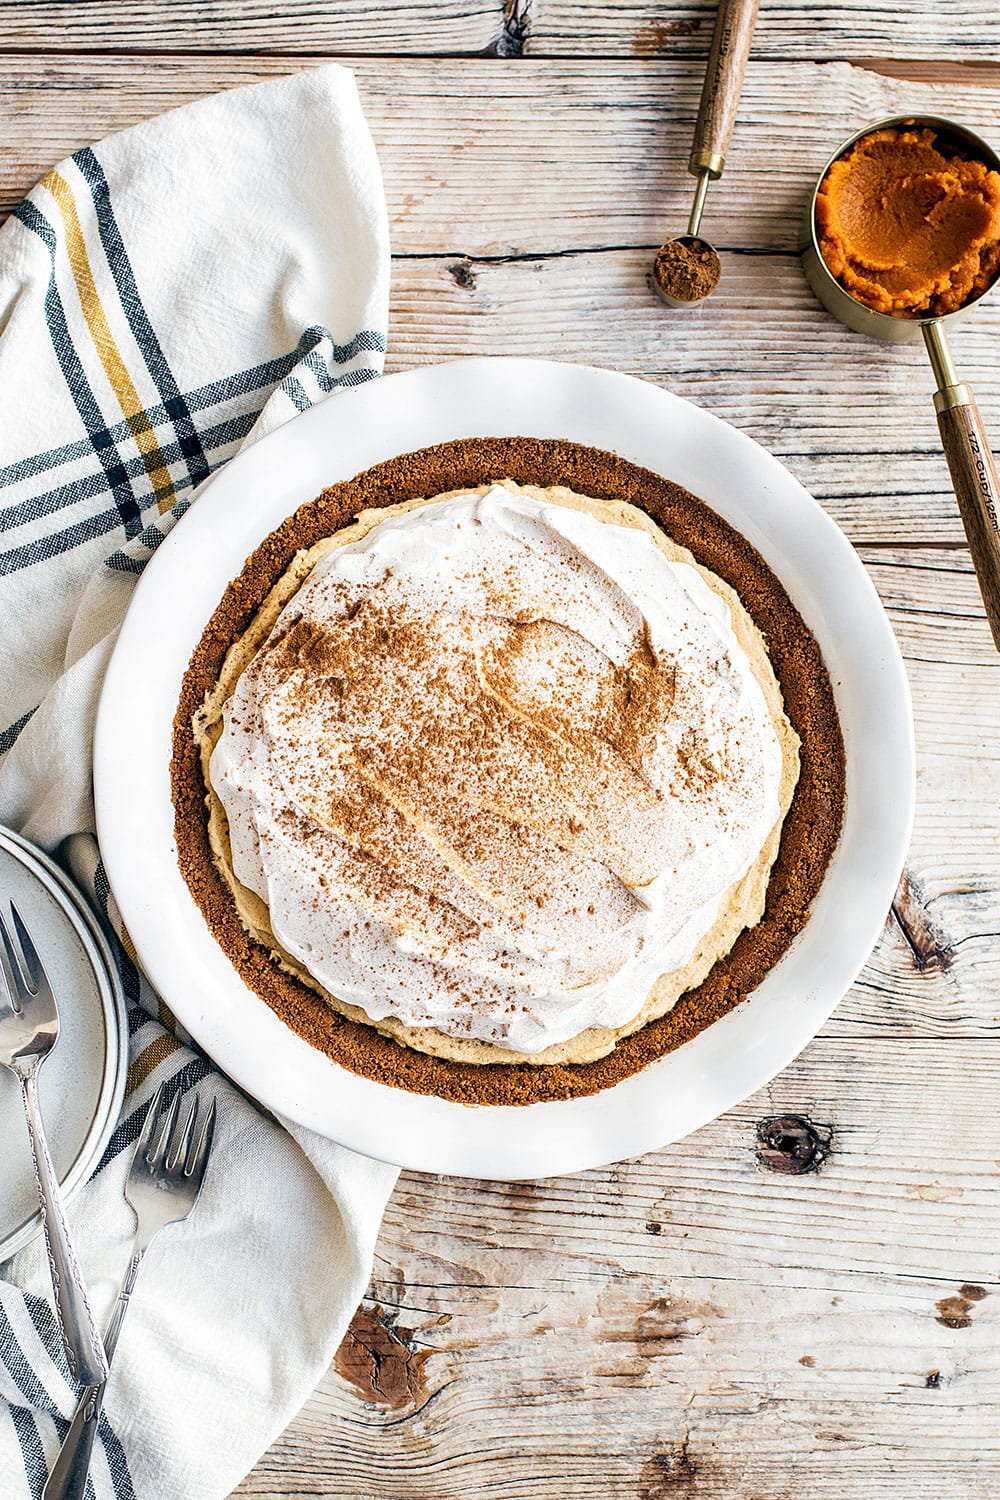 No Bake Pumpkin Mousse Pie features a thick Biscoff cookie crust filled with homemade pumpkin spice mousse and topped with fresh whipped cream. It’s the ultimate easy pumpkin pie for Thanksgiving!